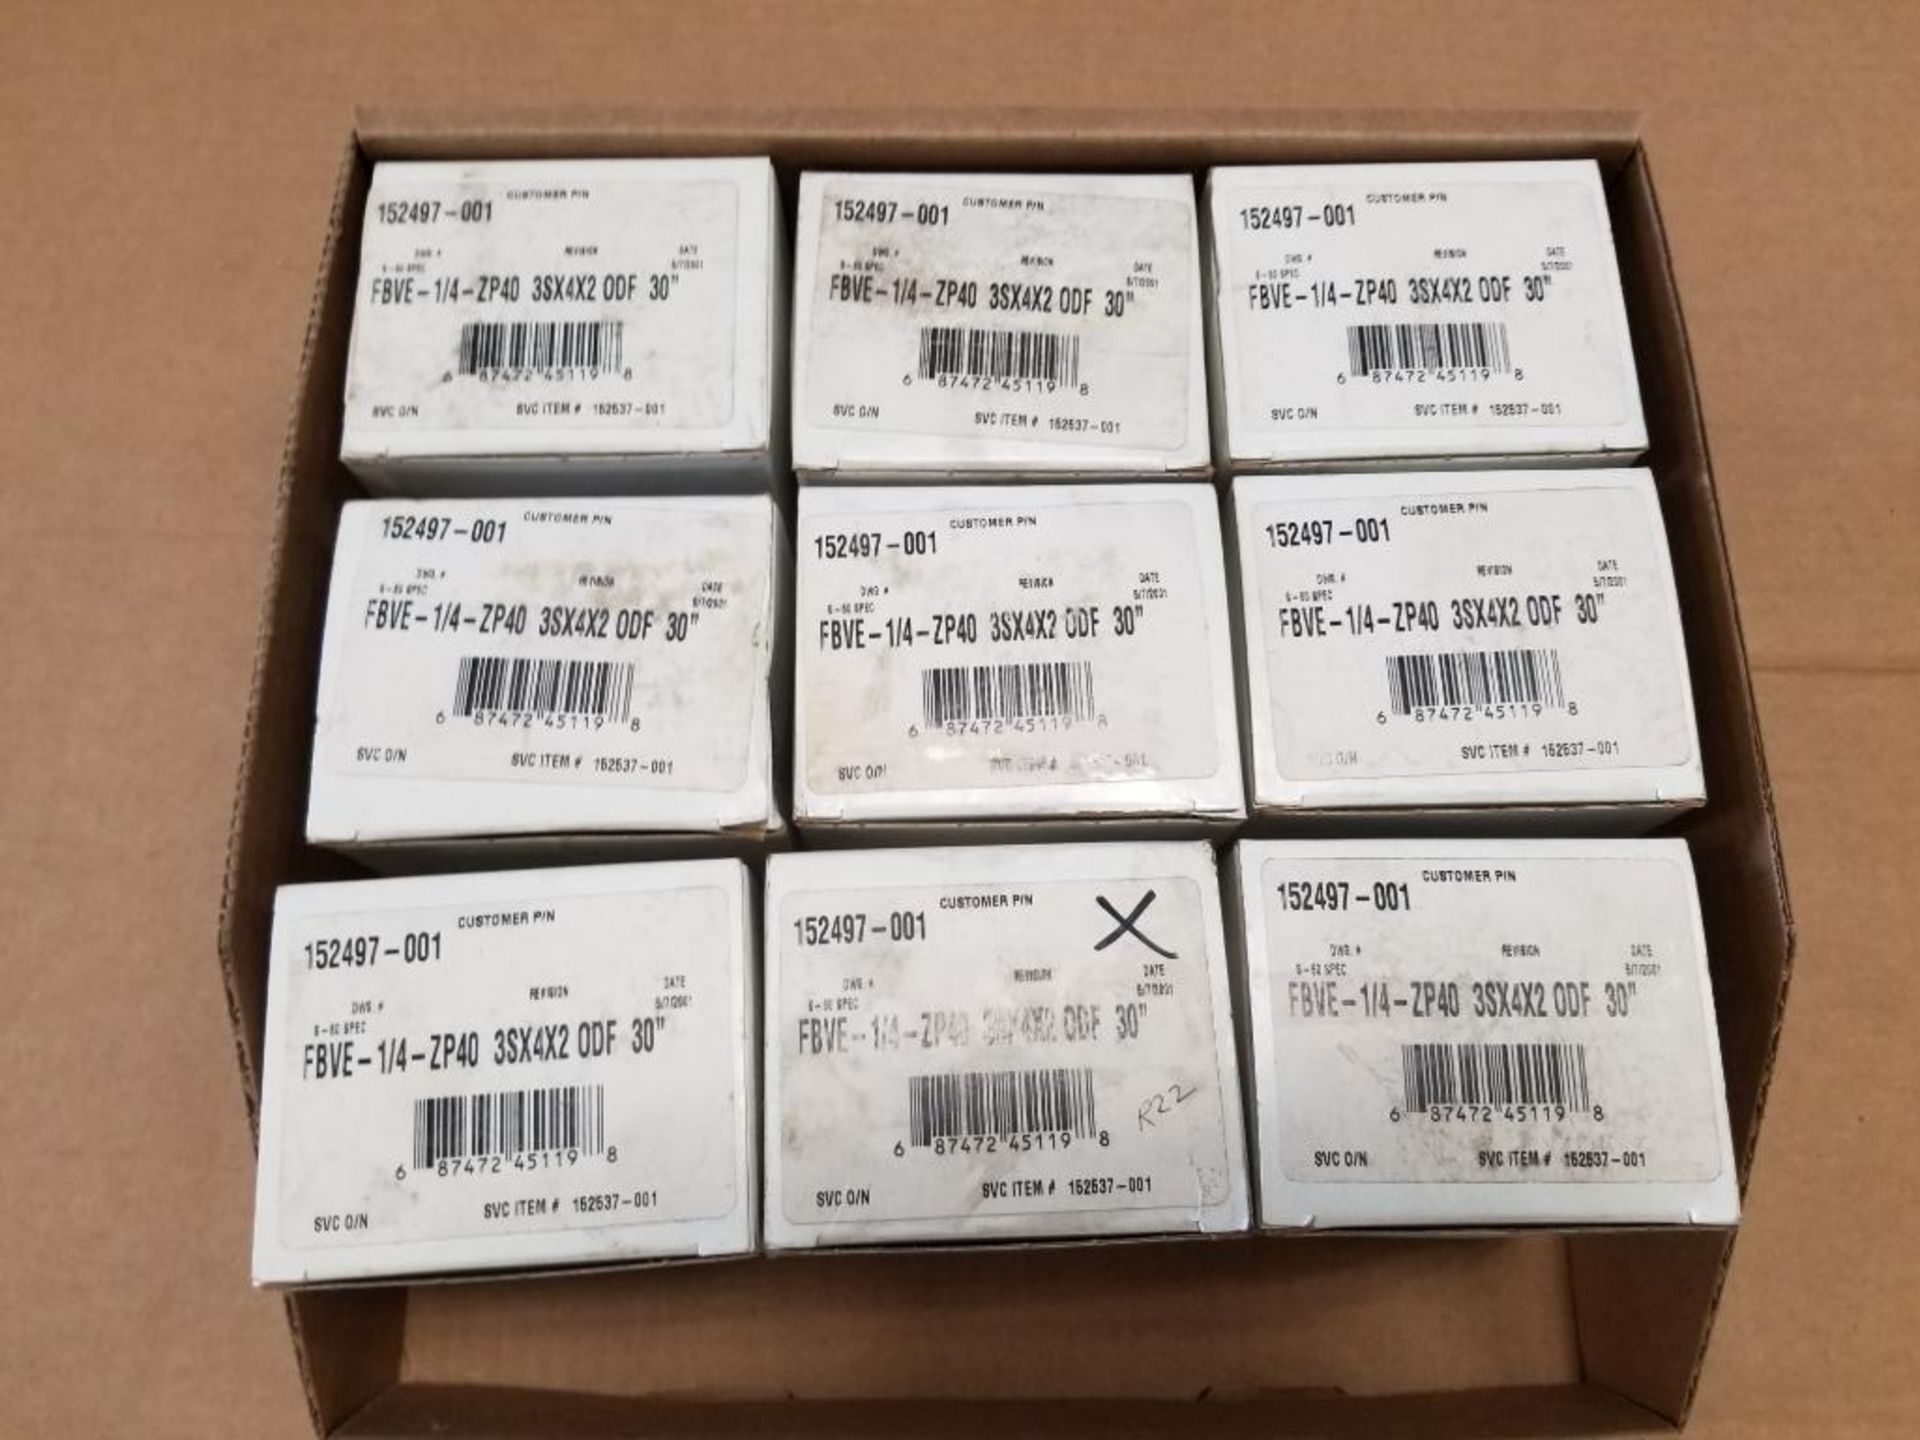 Qty 9 - Valve. Part number FBVE-1/4-ZP40. New in box. - Image 3 of 3